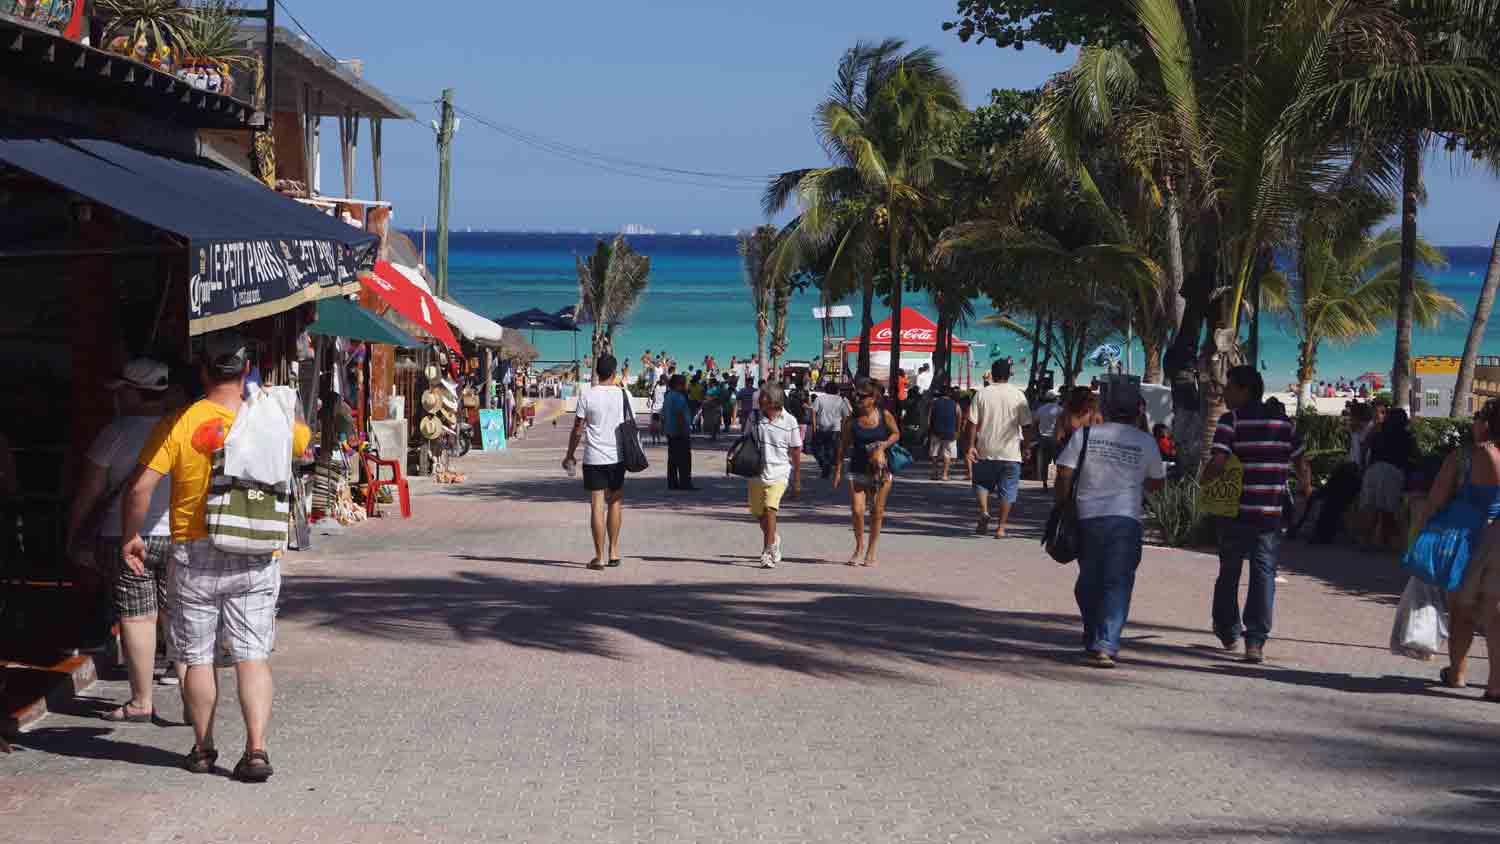 A central street that runs directly into the beach in Playa Del Carmen.